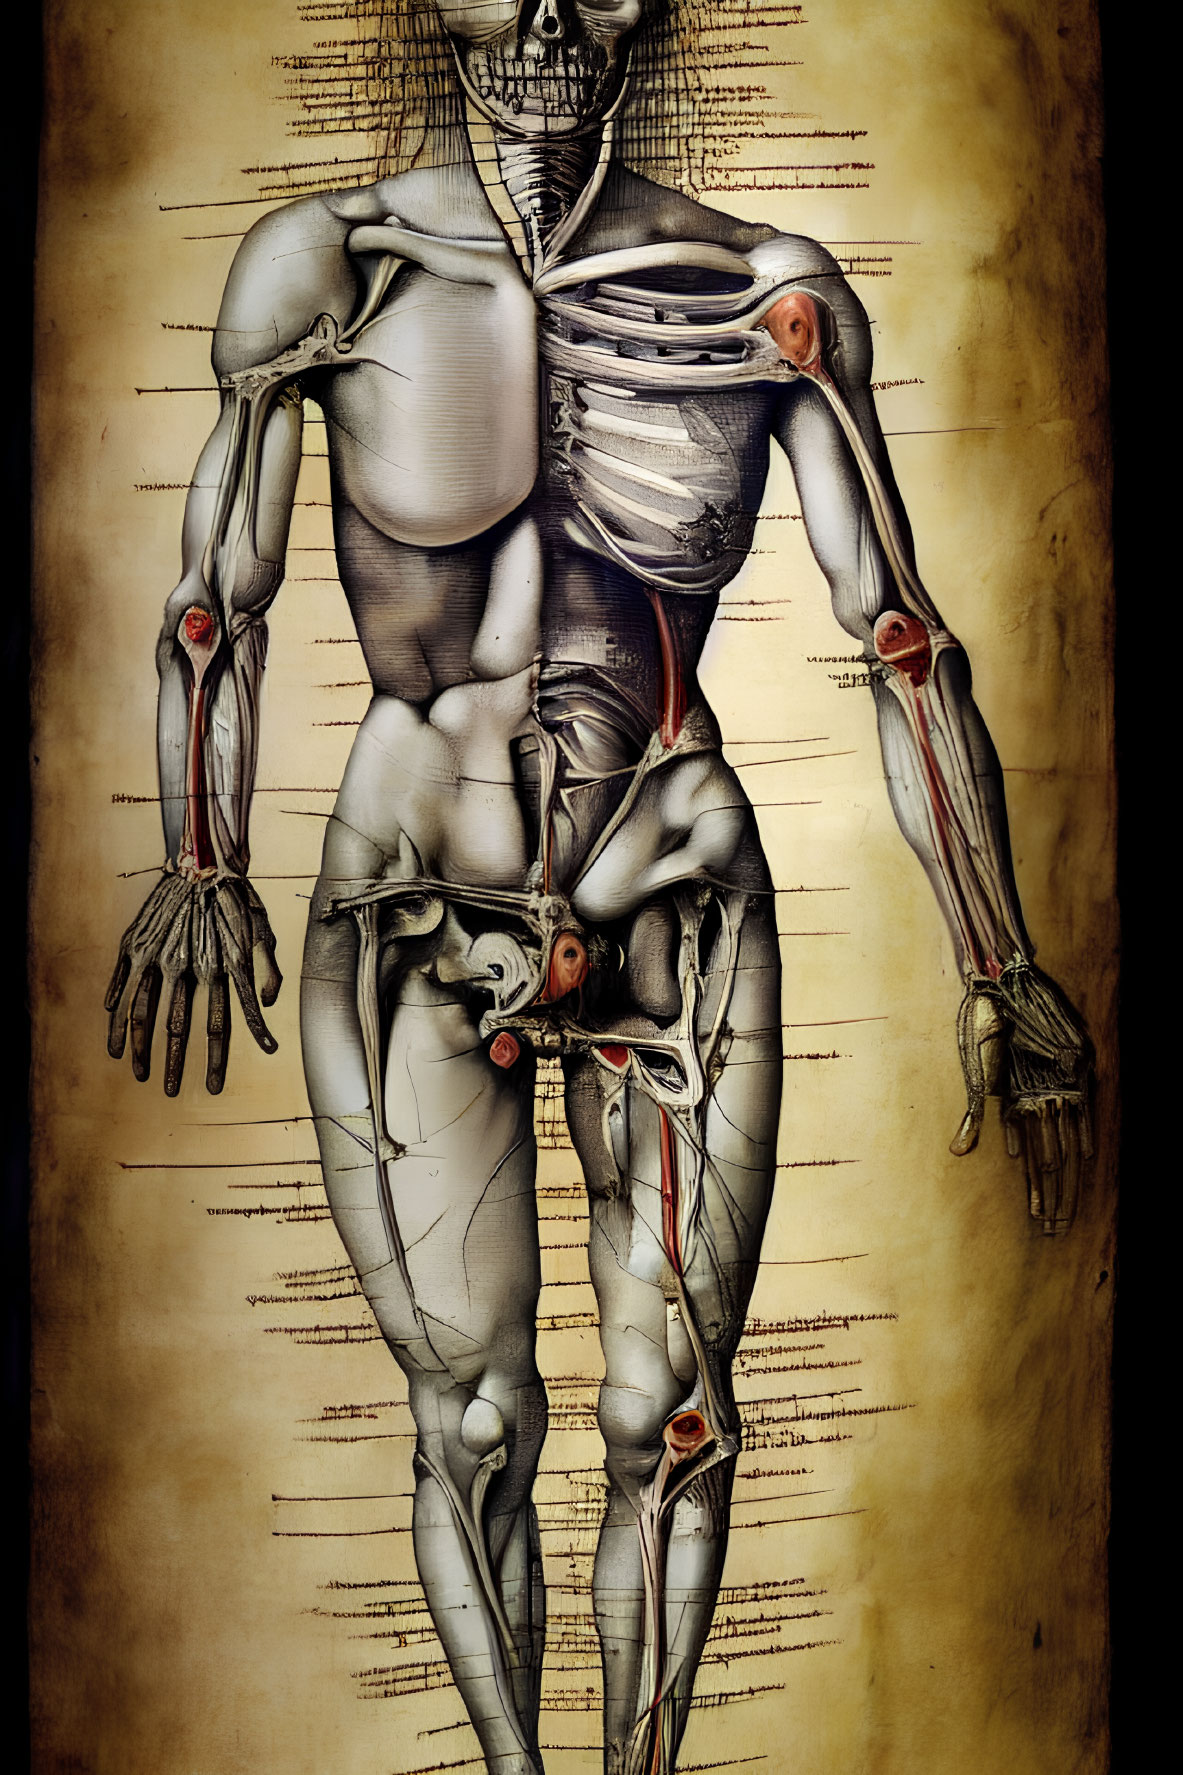 Detailed Human Figure Anatomy Illustration with Muscles and Skeleton on Vintage Background